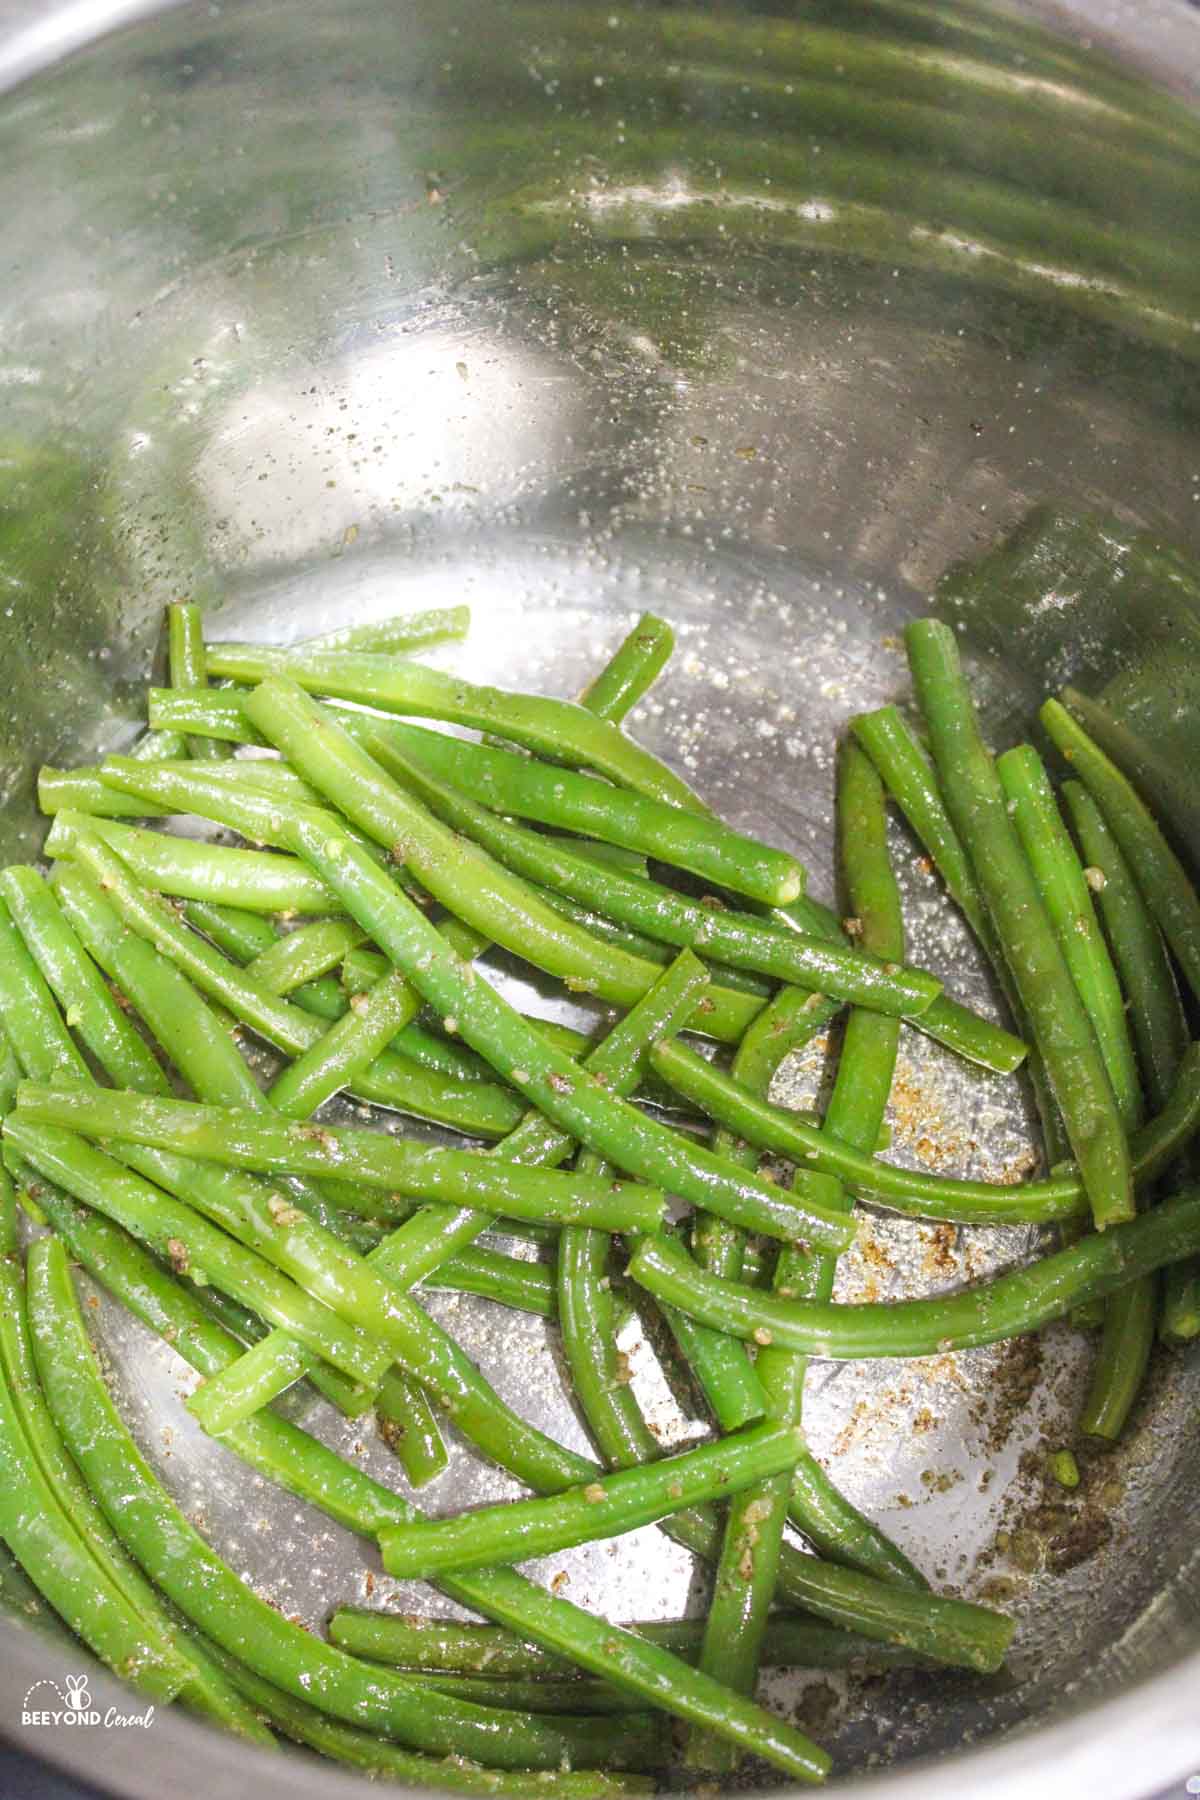 sauted green beans with seasonings in instant pot.